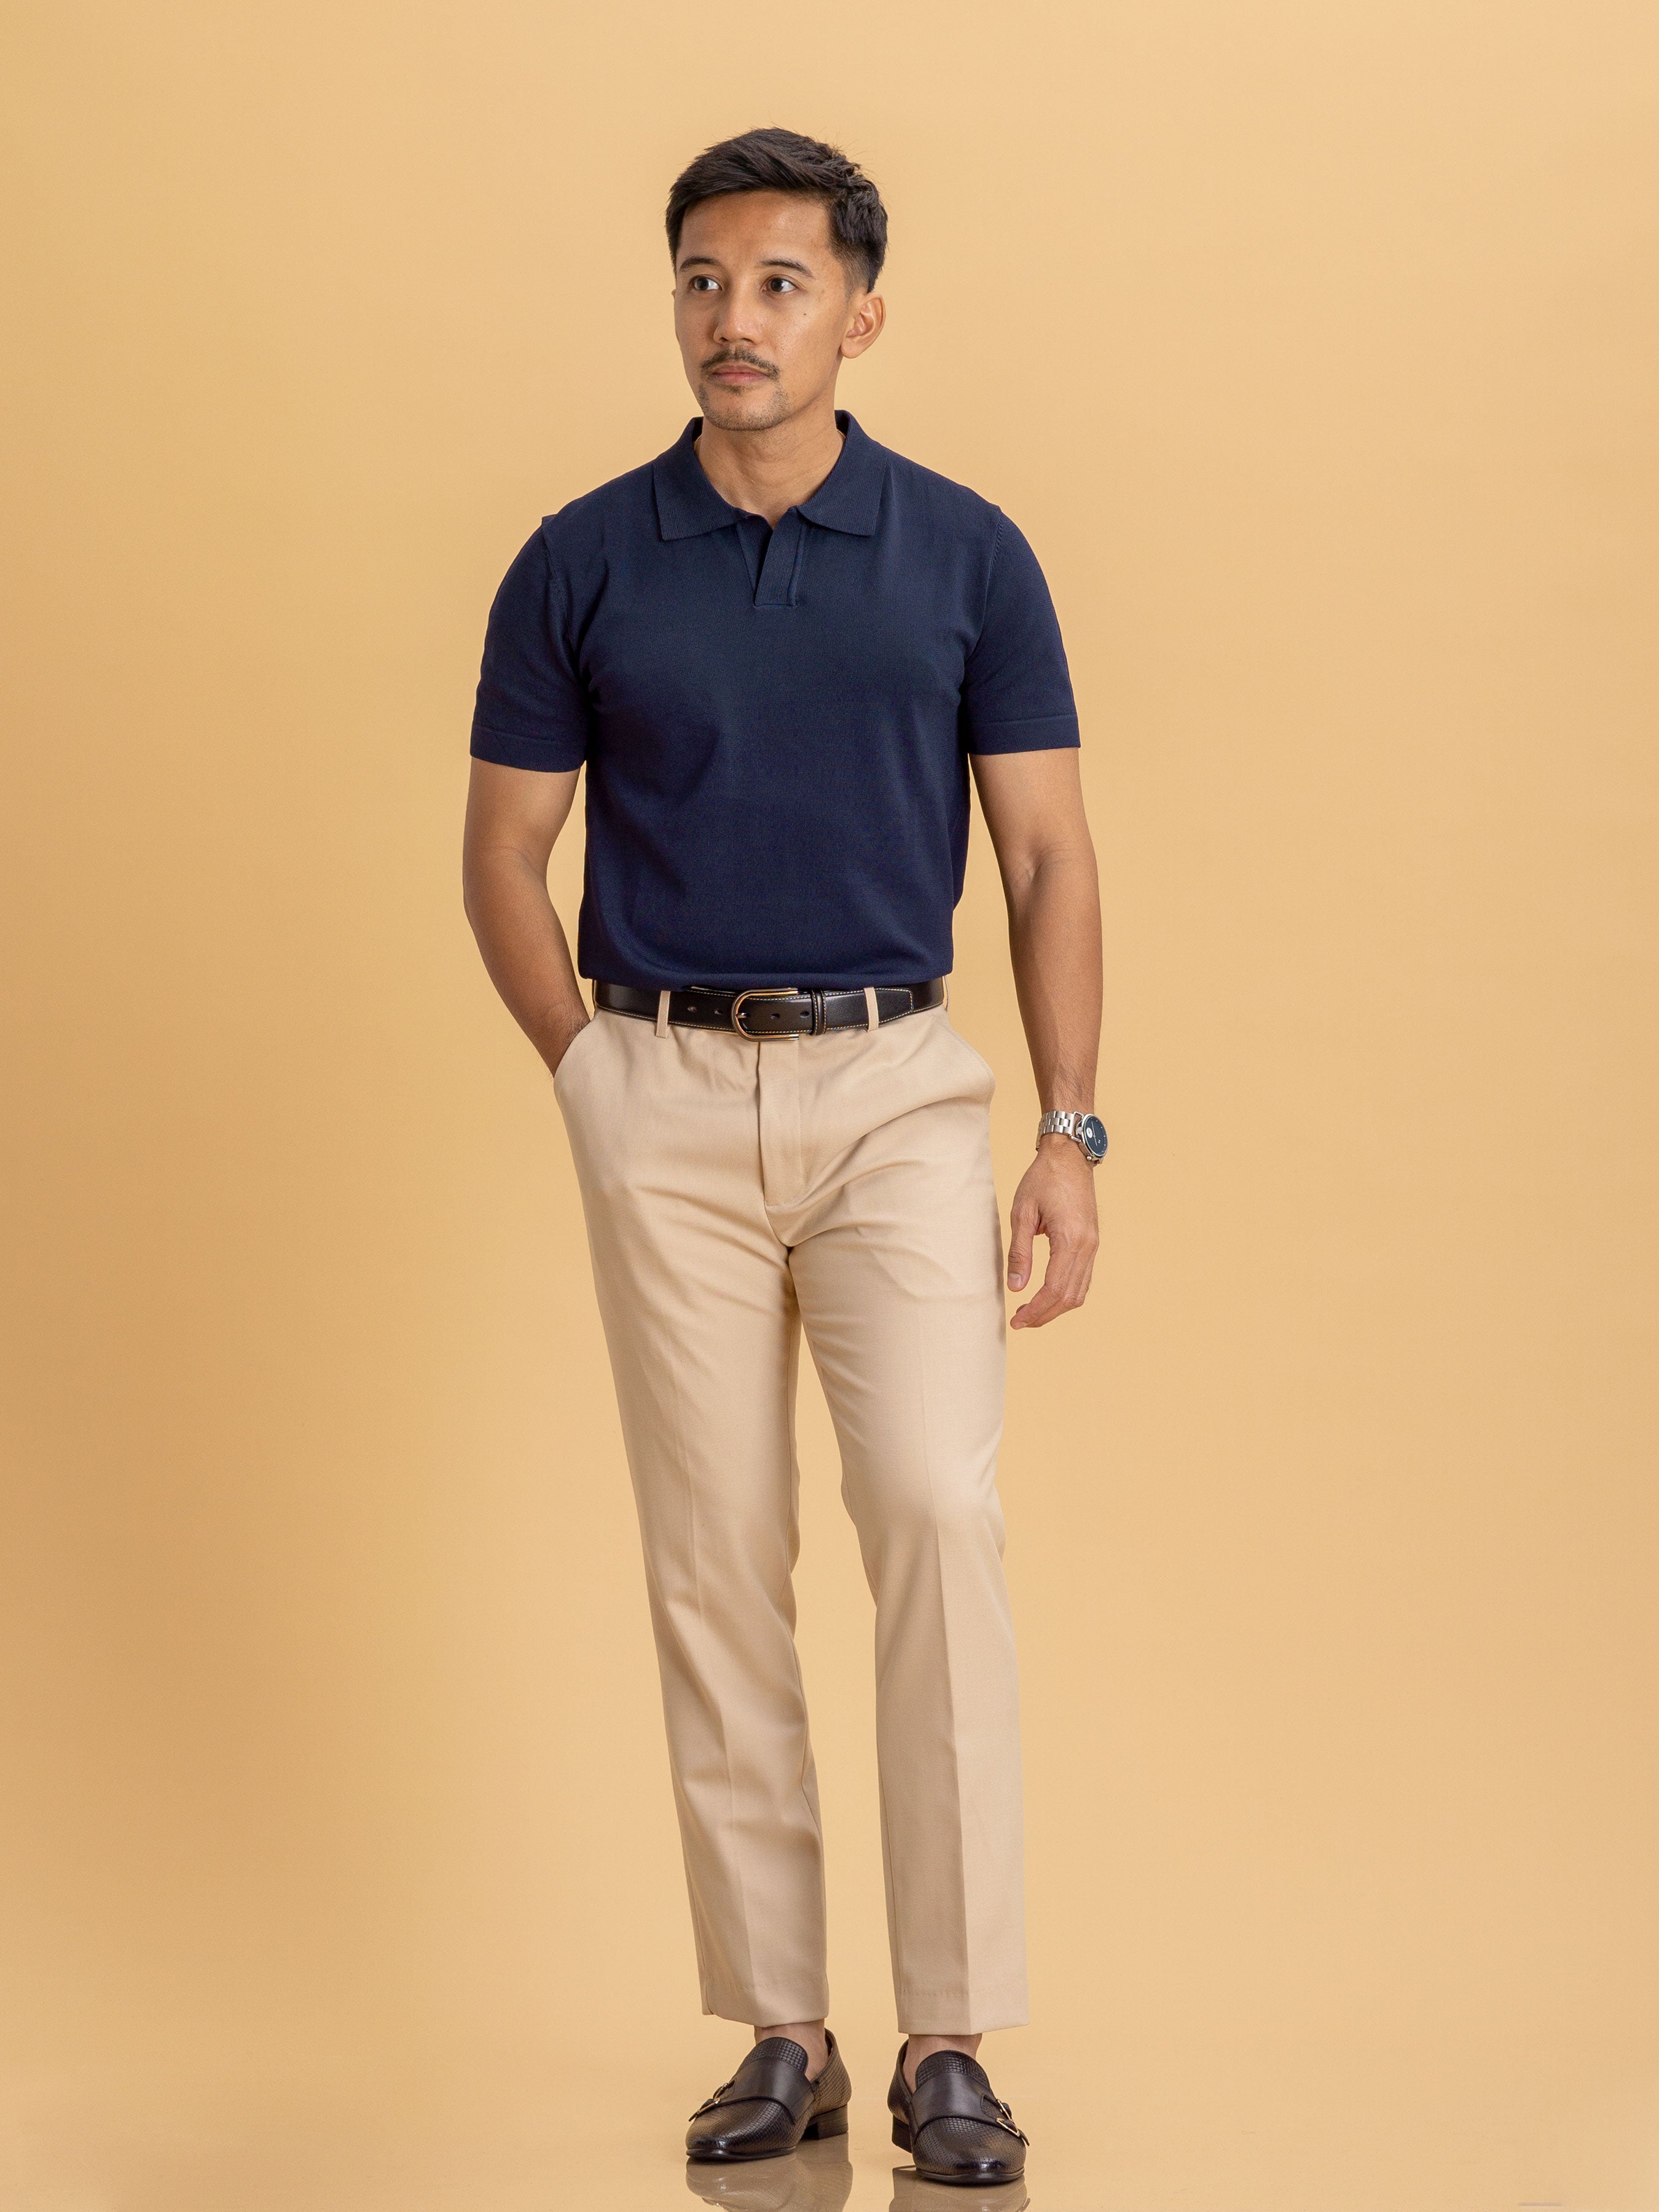 Knit Polo Tee - Navy Blue Open Collar - Zeve Shoes